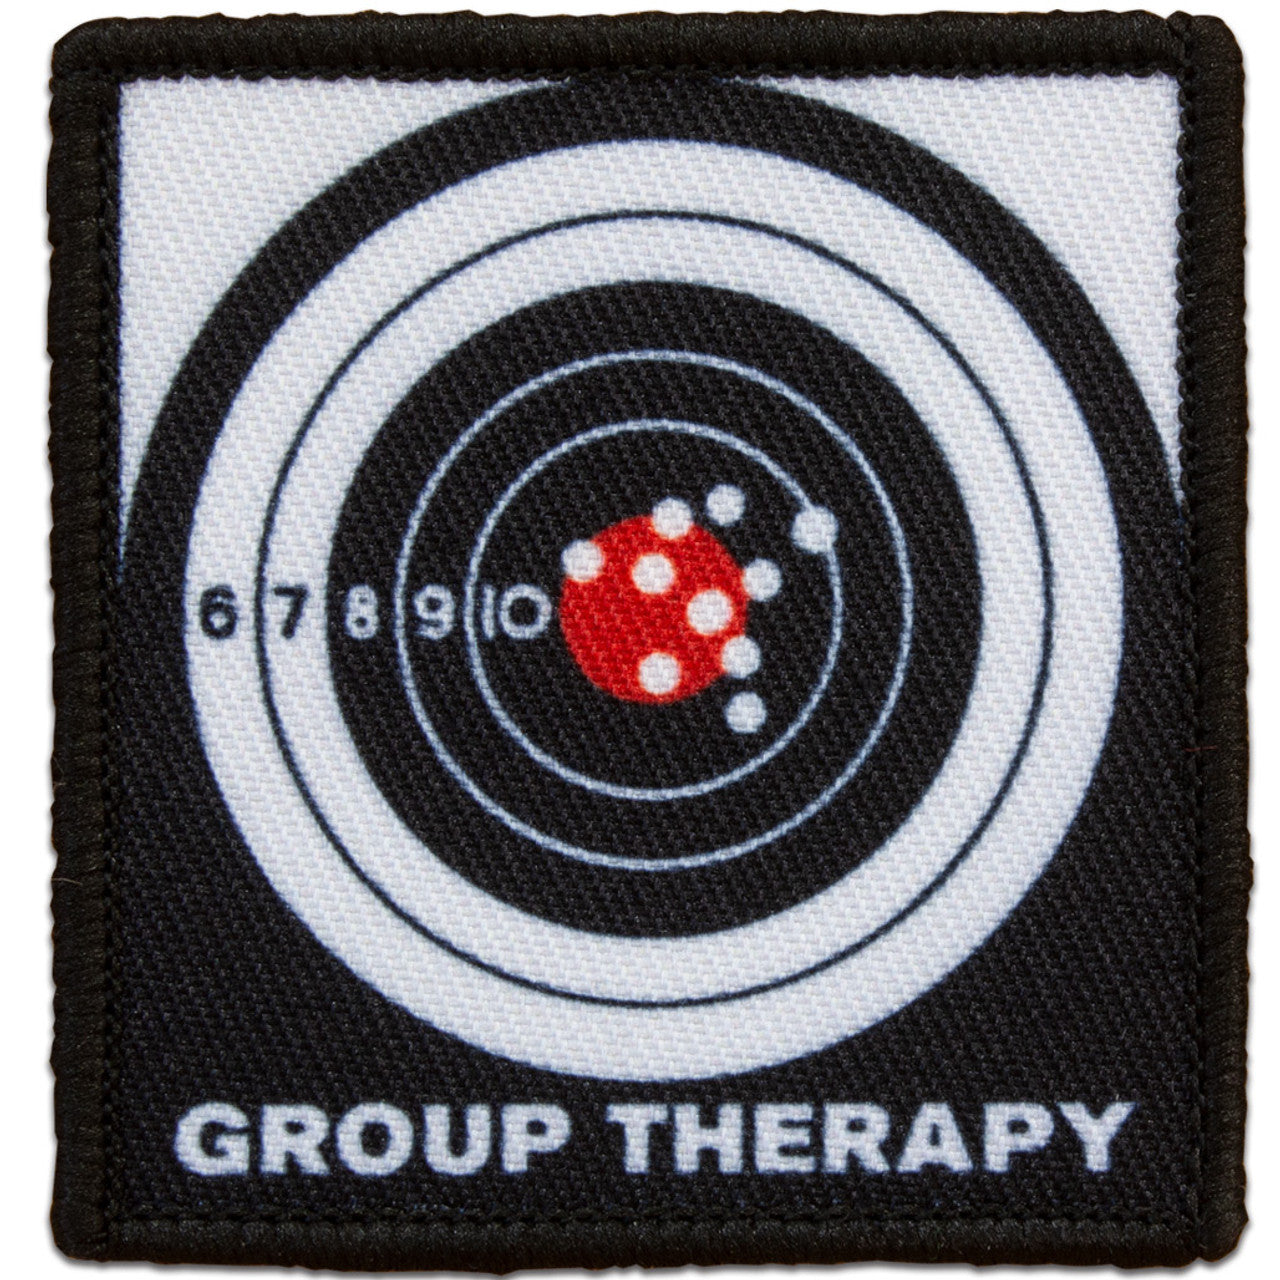 "GROUP THERAPY" MORALE PATCH